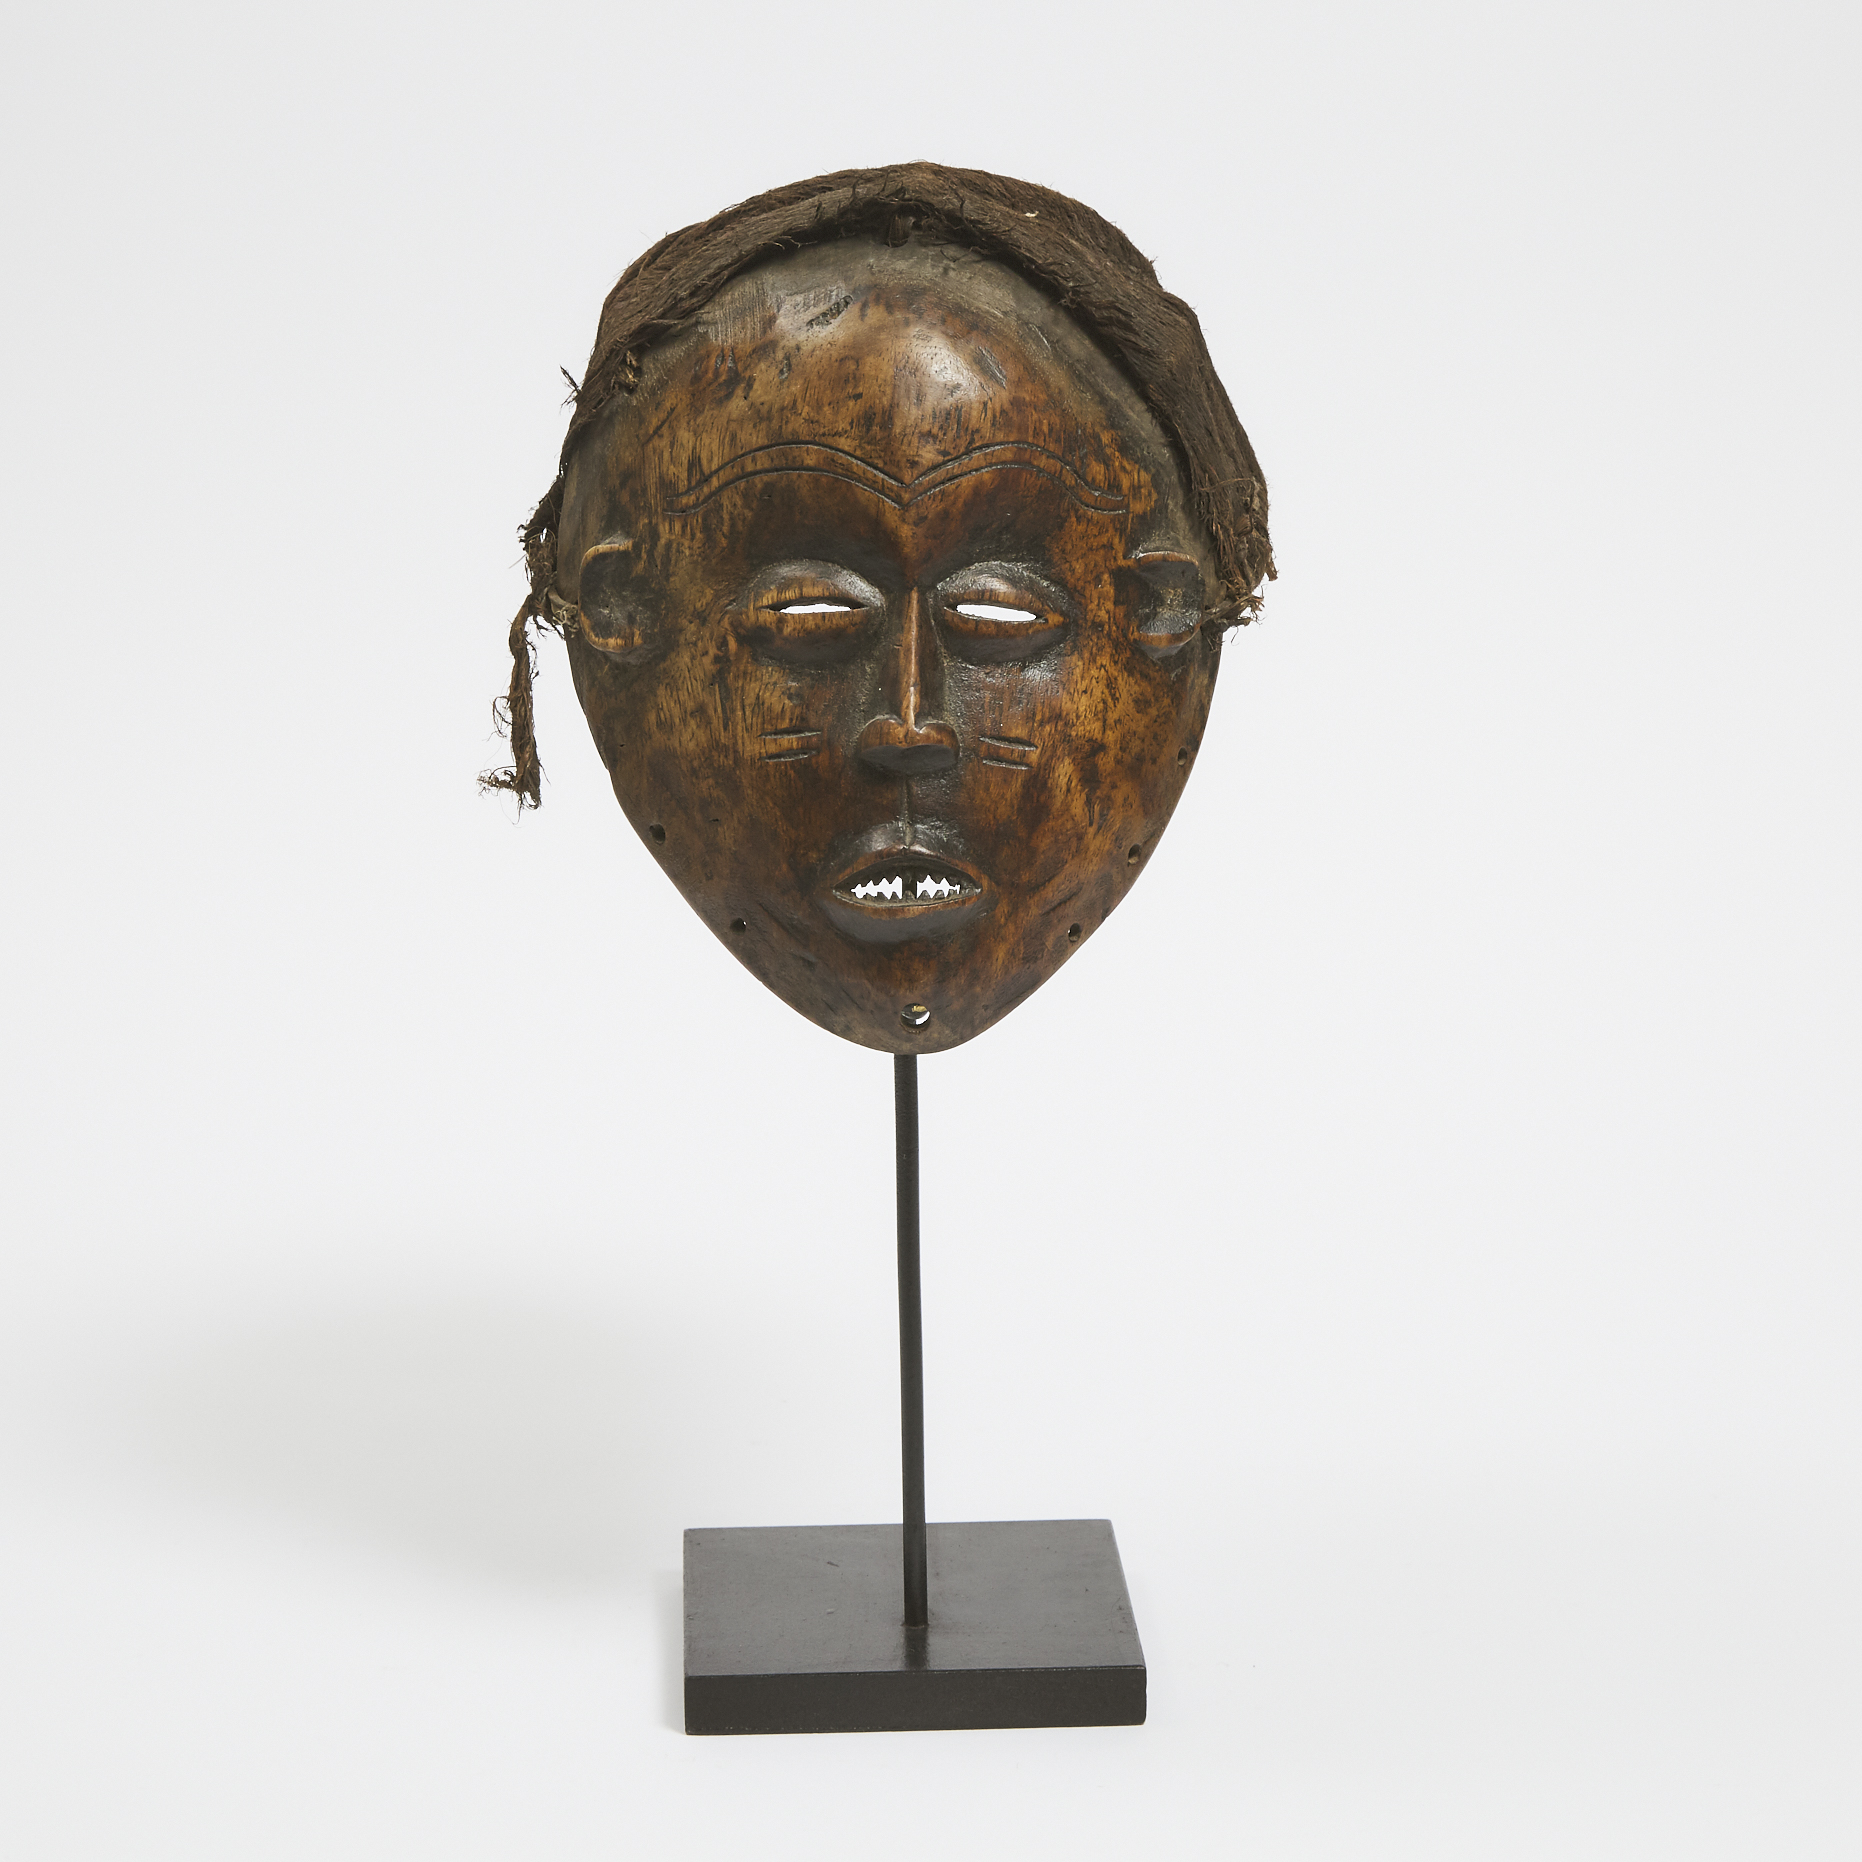 Chokwe/Lwena Mwano Pwo Mask, Central Africa, mid to late 20th century